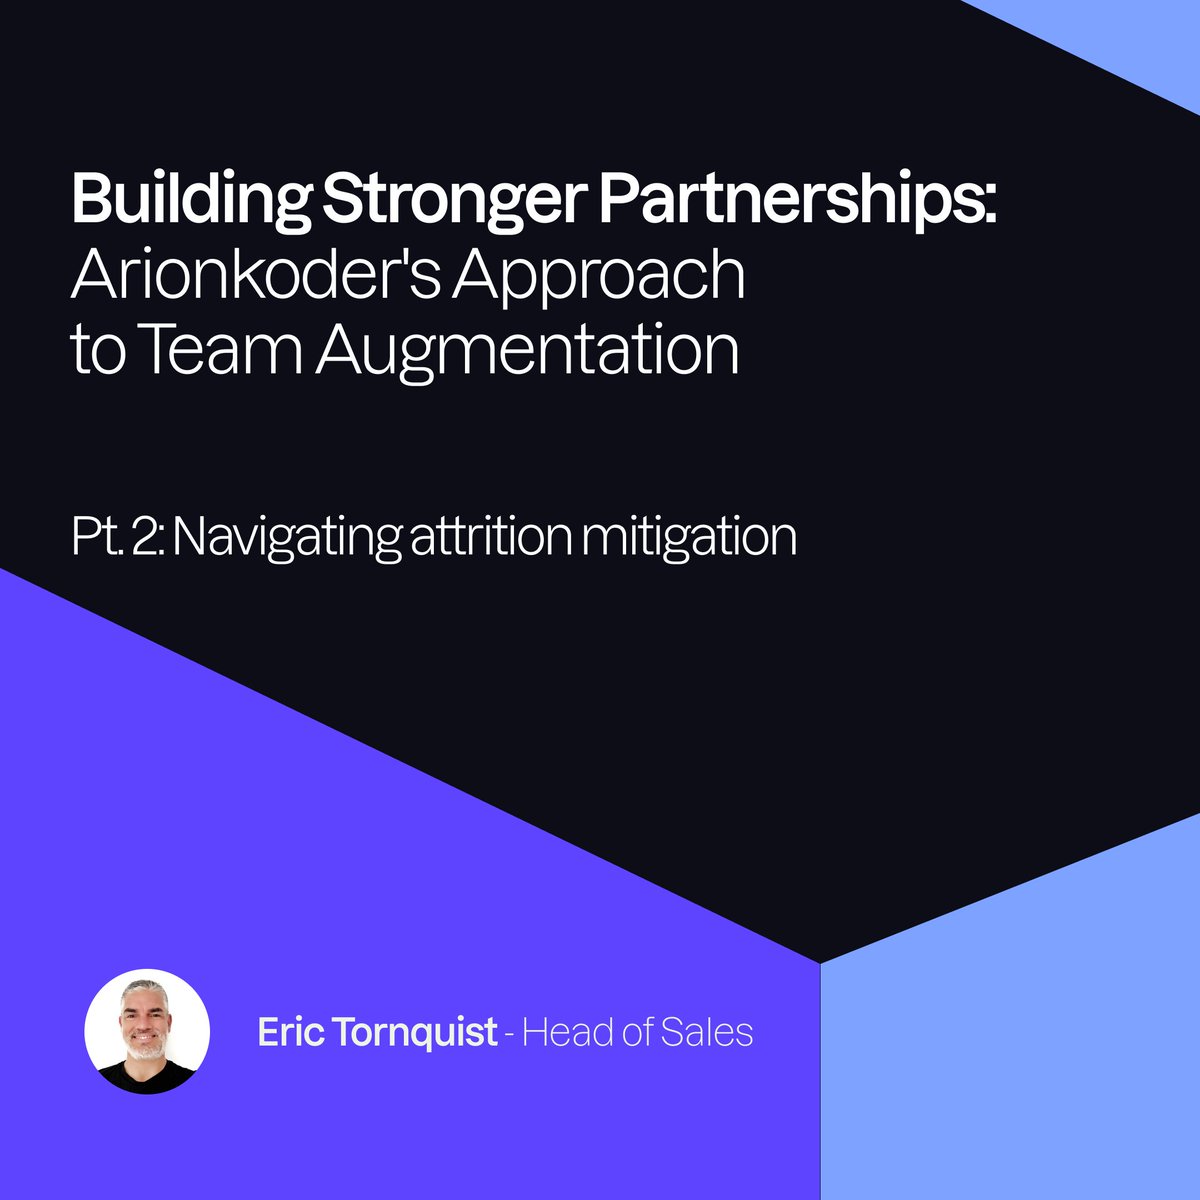 #TeamAugmentation helps companies reach their #businessgoals by expanding their teams. This can be challenged by #attrition, but at Arionkoder that's a thing of the past. 

Discover how we've zapped attrition as told by @Tornquist at bit.ly/teamaug2

#staffaugmentation